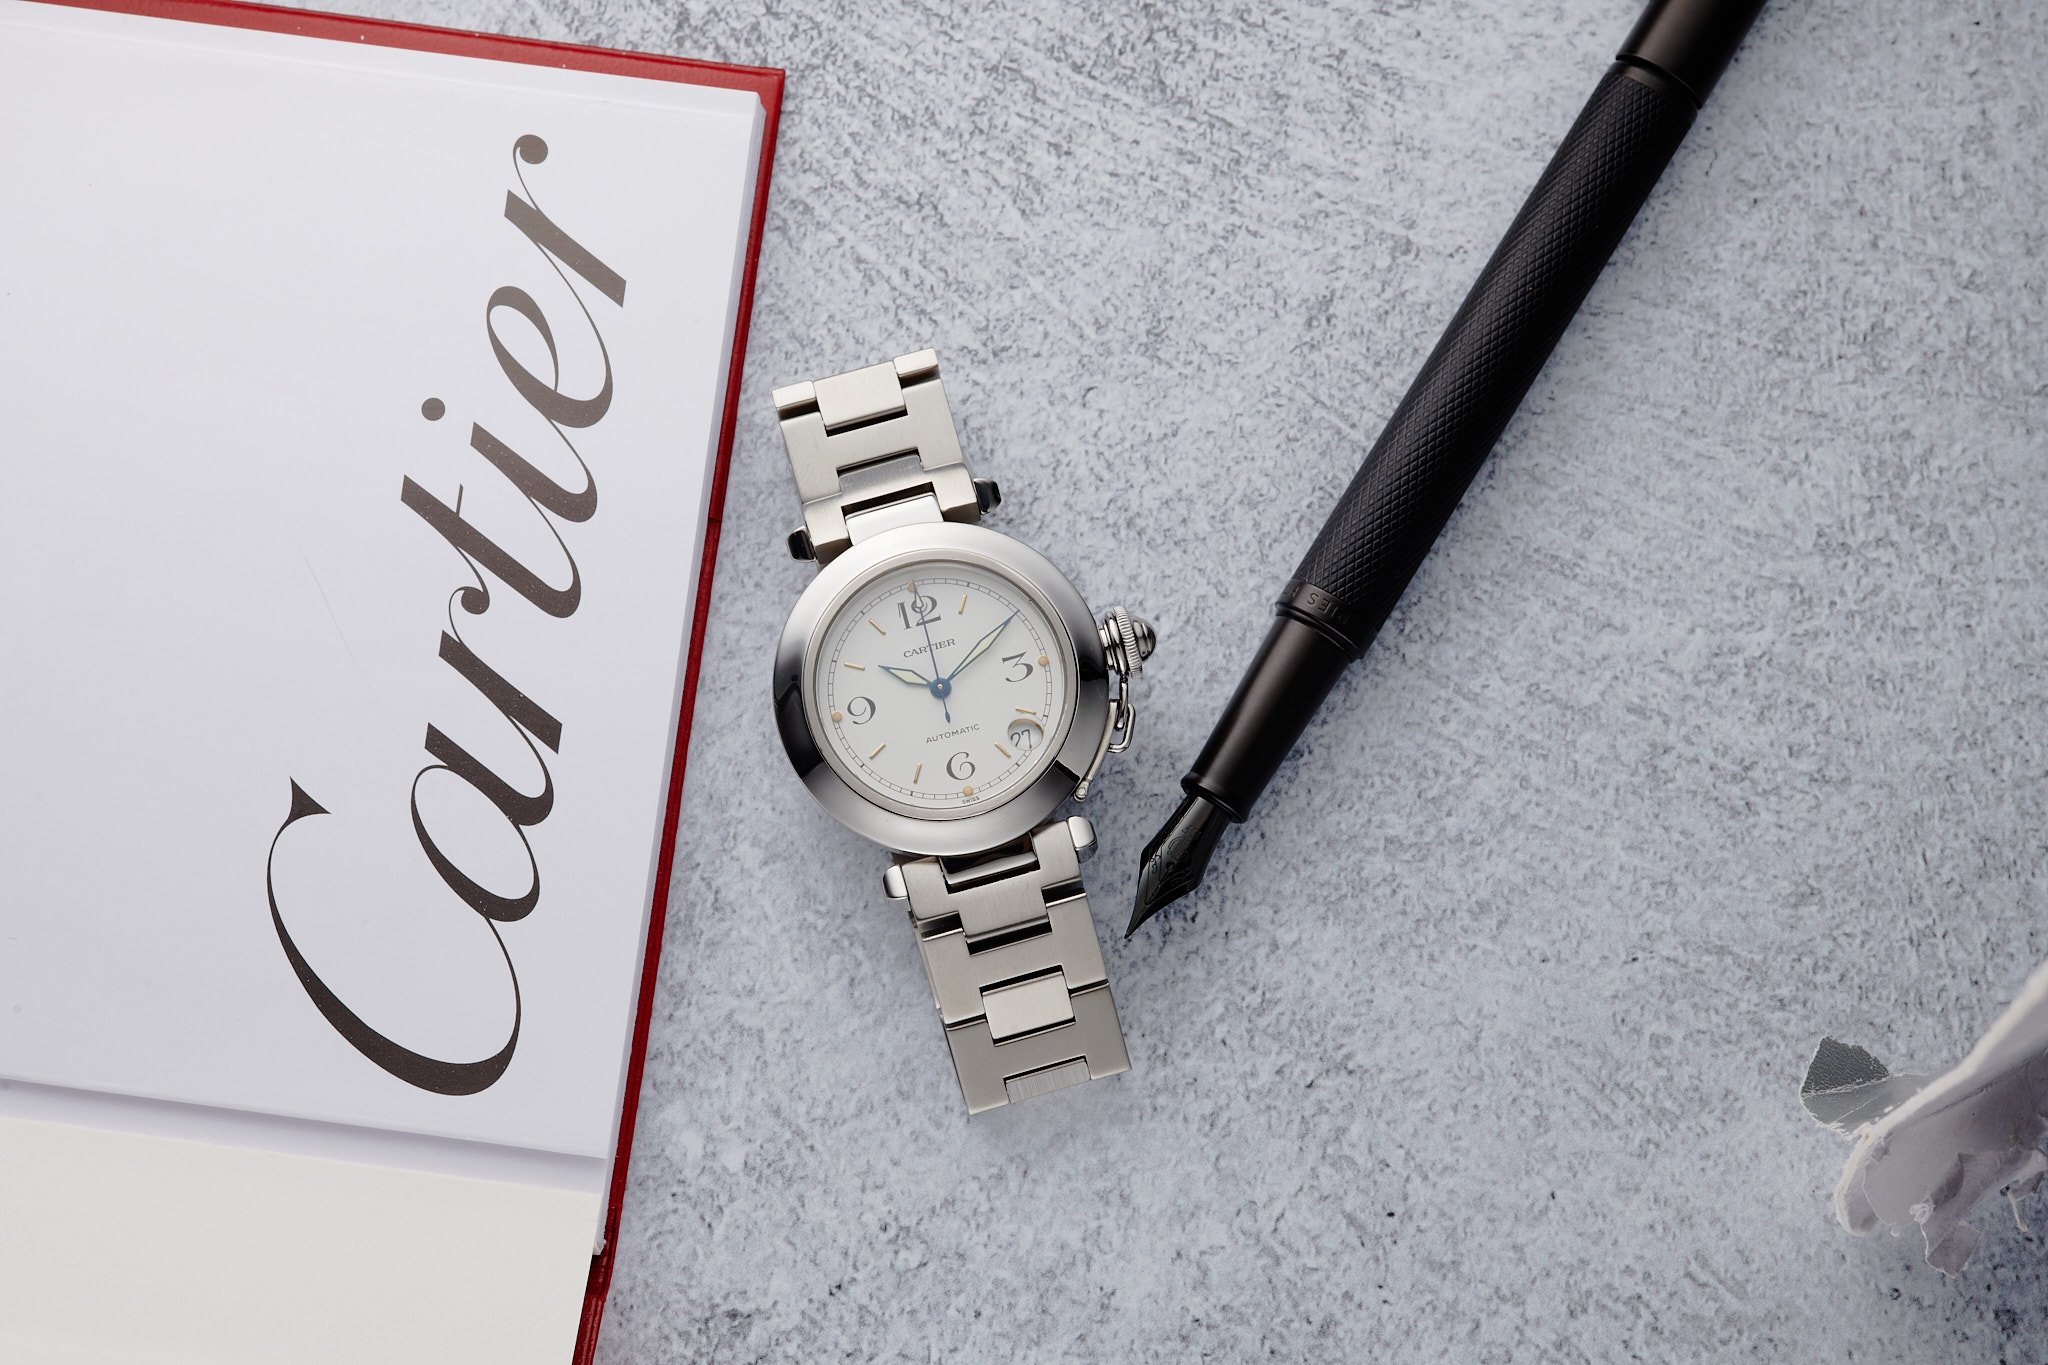 Cartier watch with fill